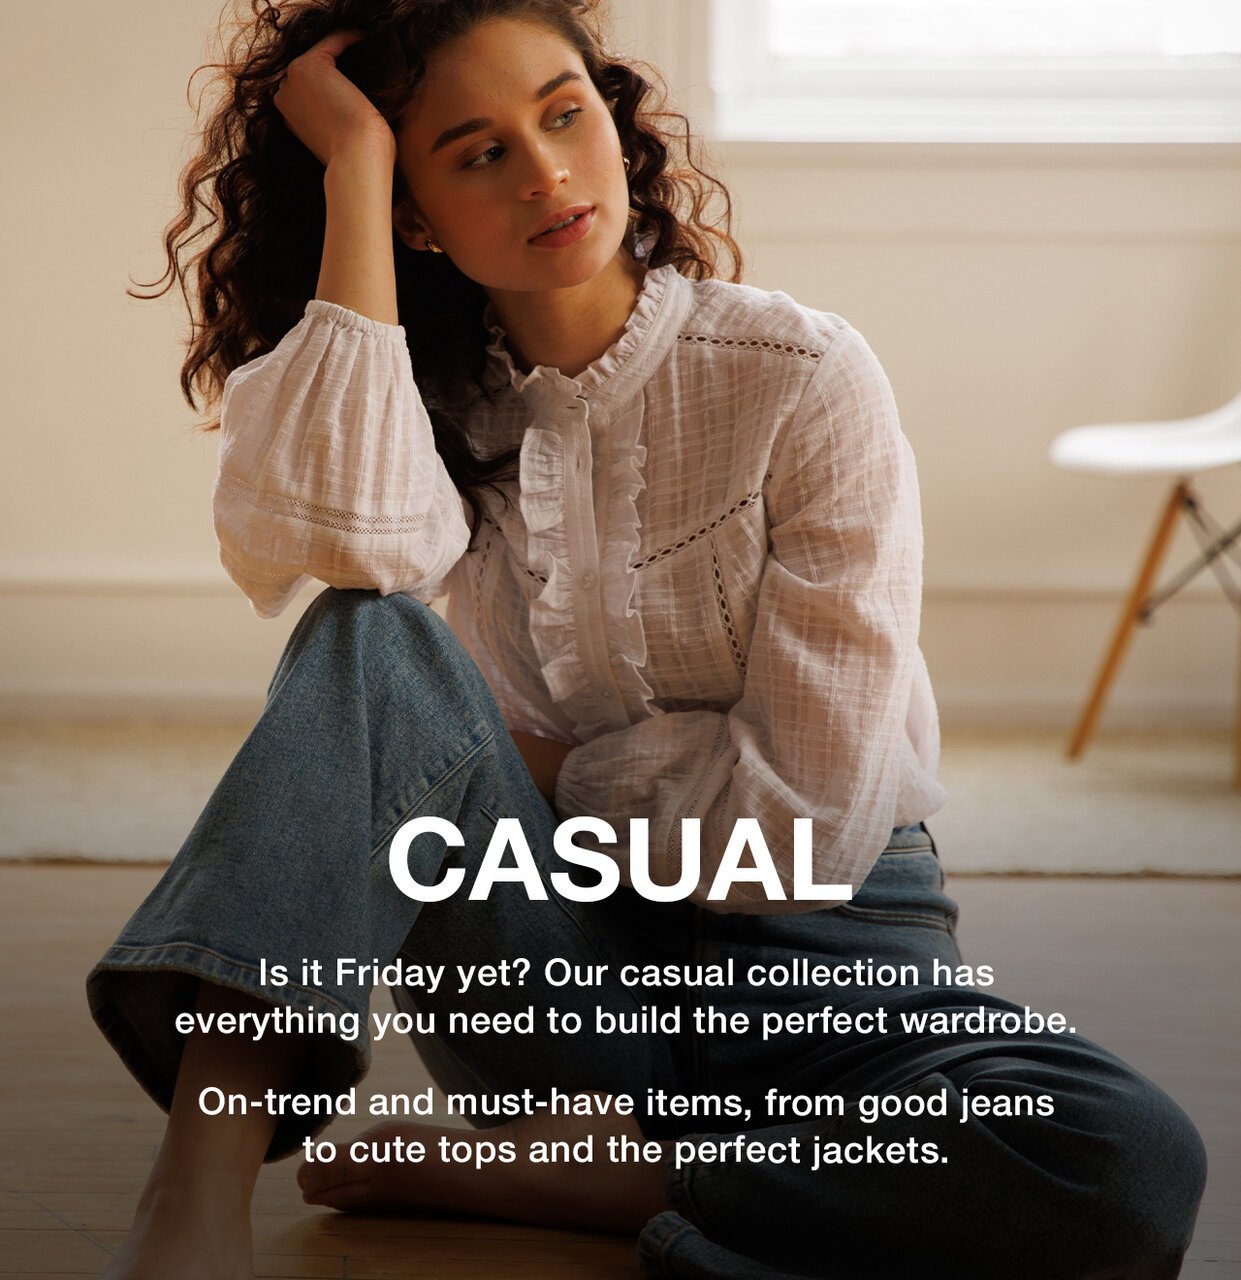 Casual - Is it Friday yet? Our casual collection has everything you need to build the perfect wardrobe. On-trend and must-have items, from good jeans to cute tops and the perfect jackets.